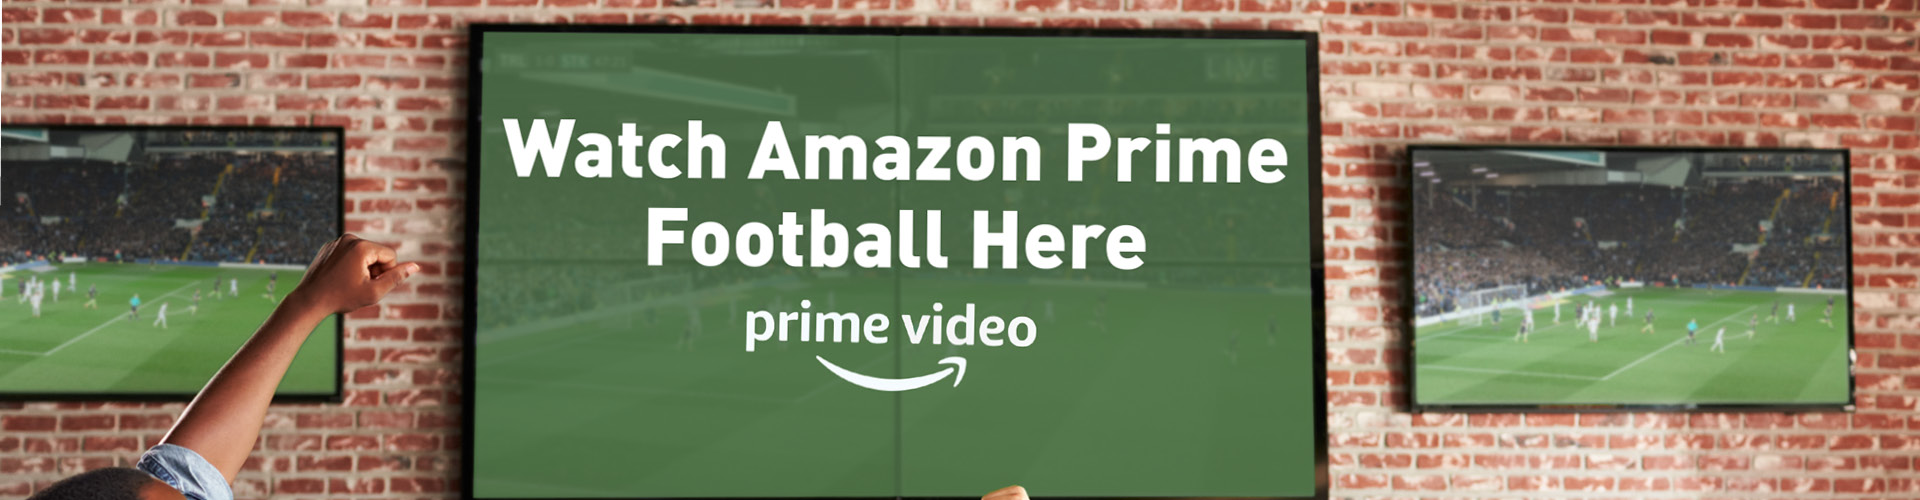 Watch Amazon Prime football at Monks Retreat in Reading